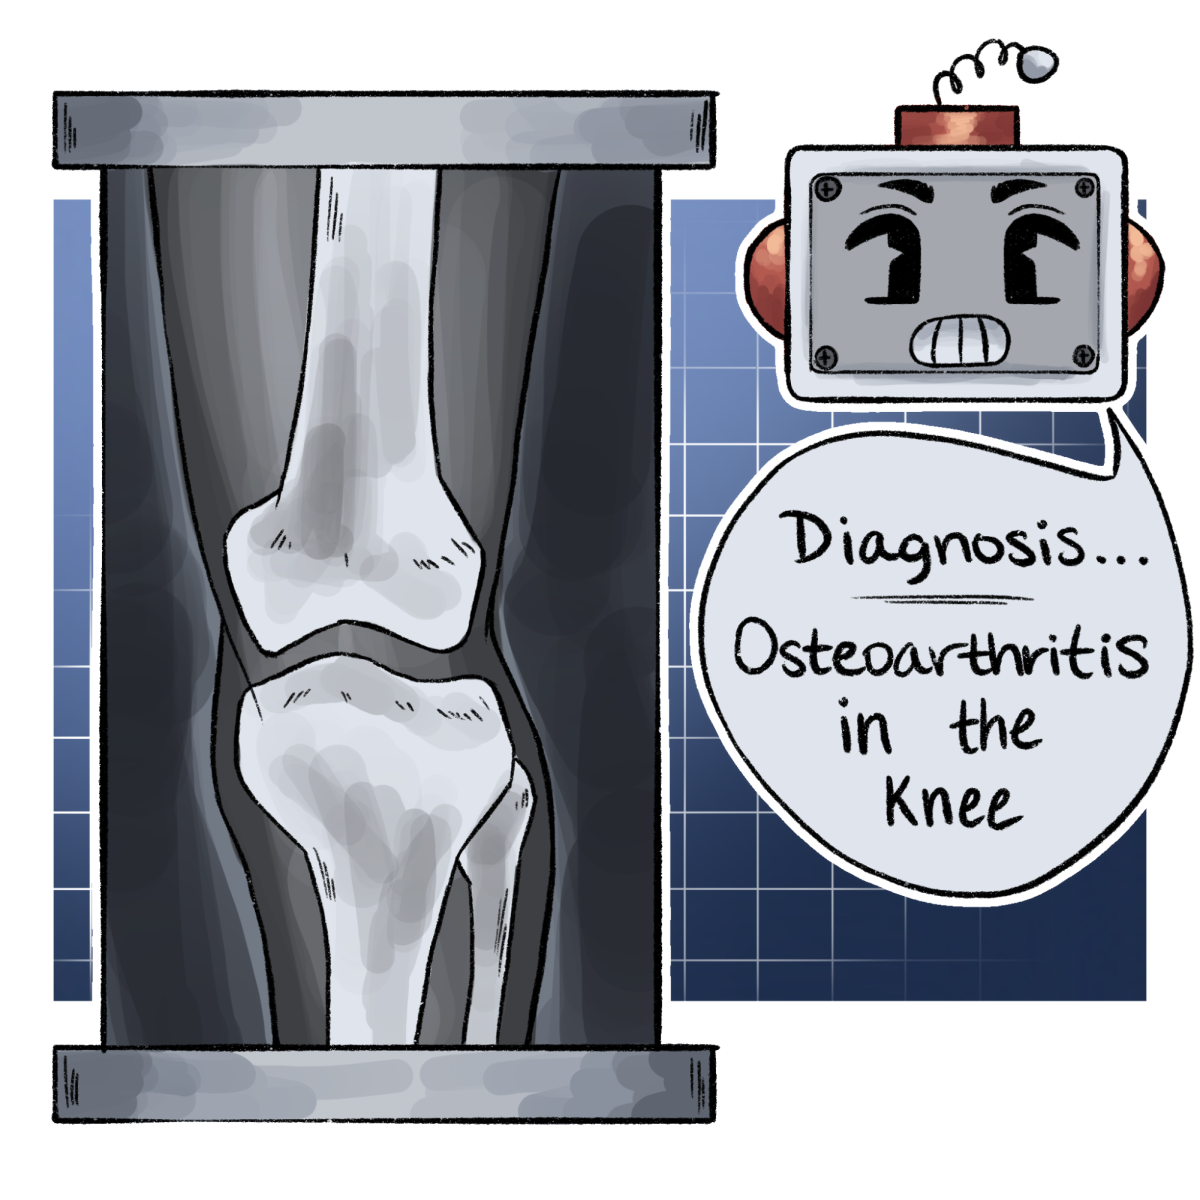 Researchers train AI model to diagnose knee osteoarthritis with clinical-grade performance